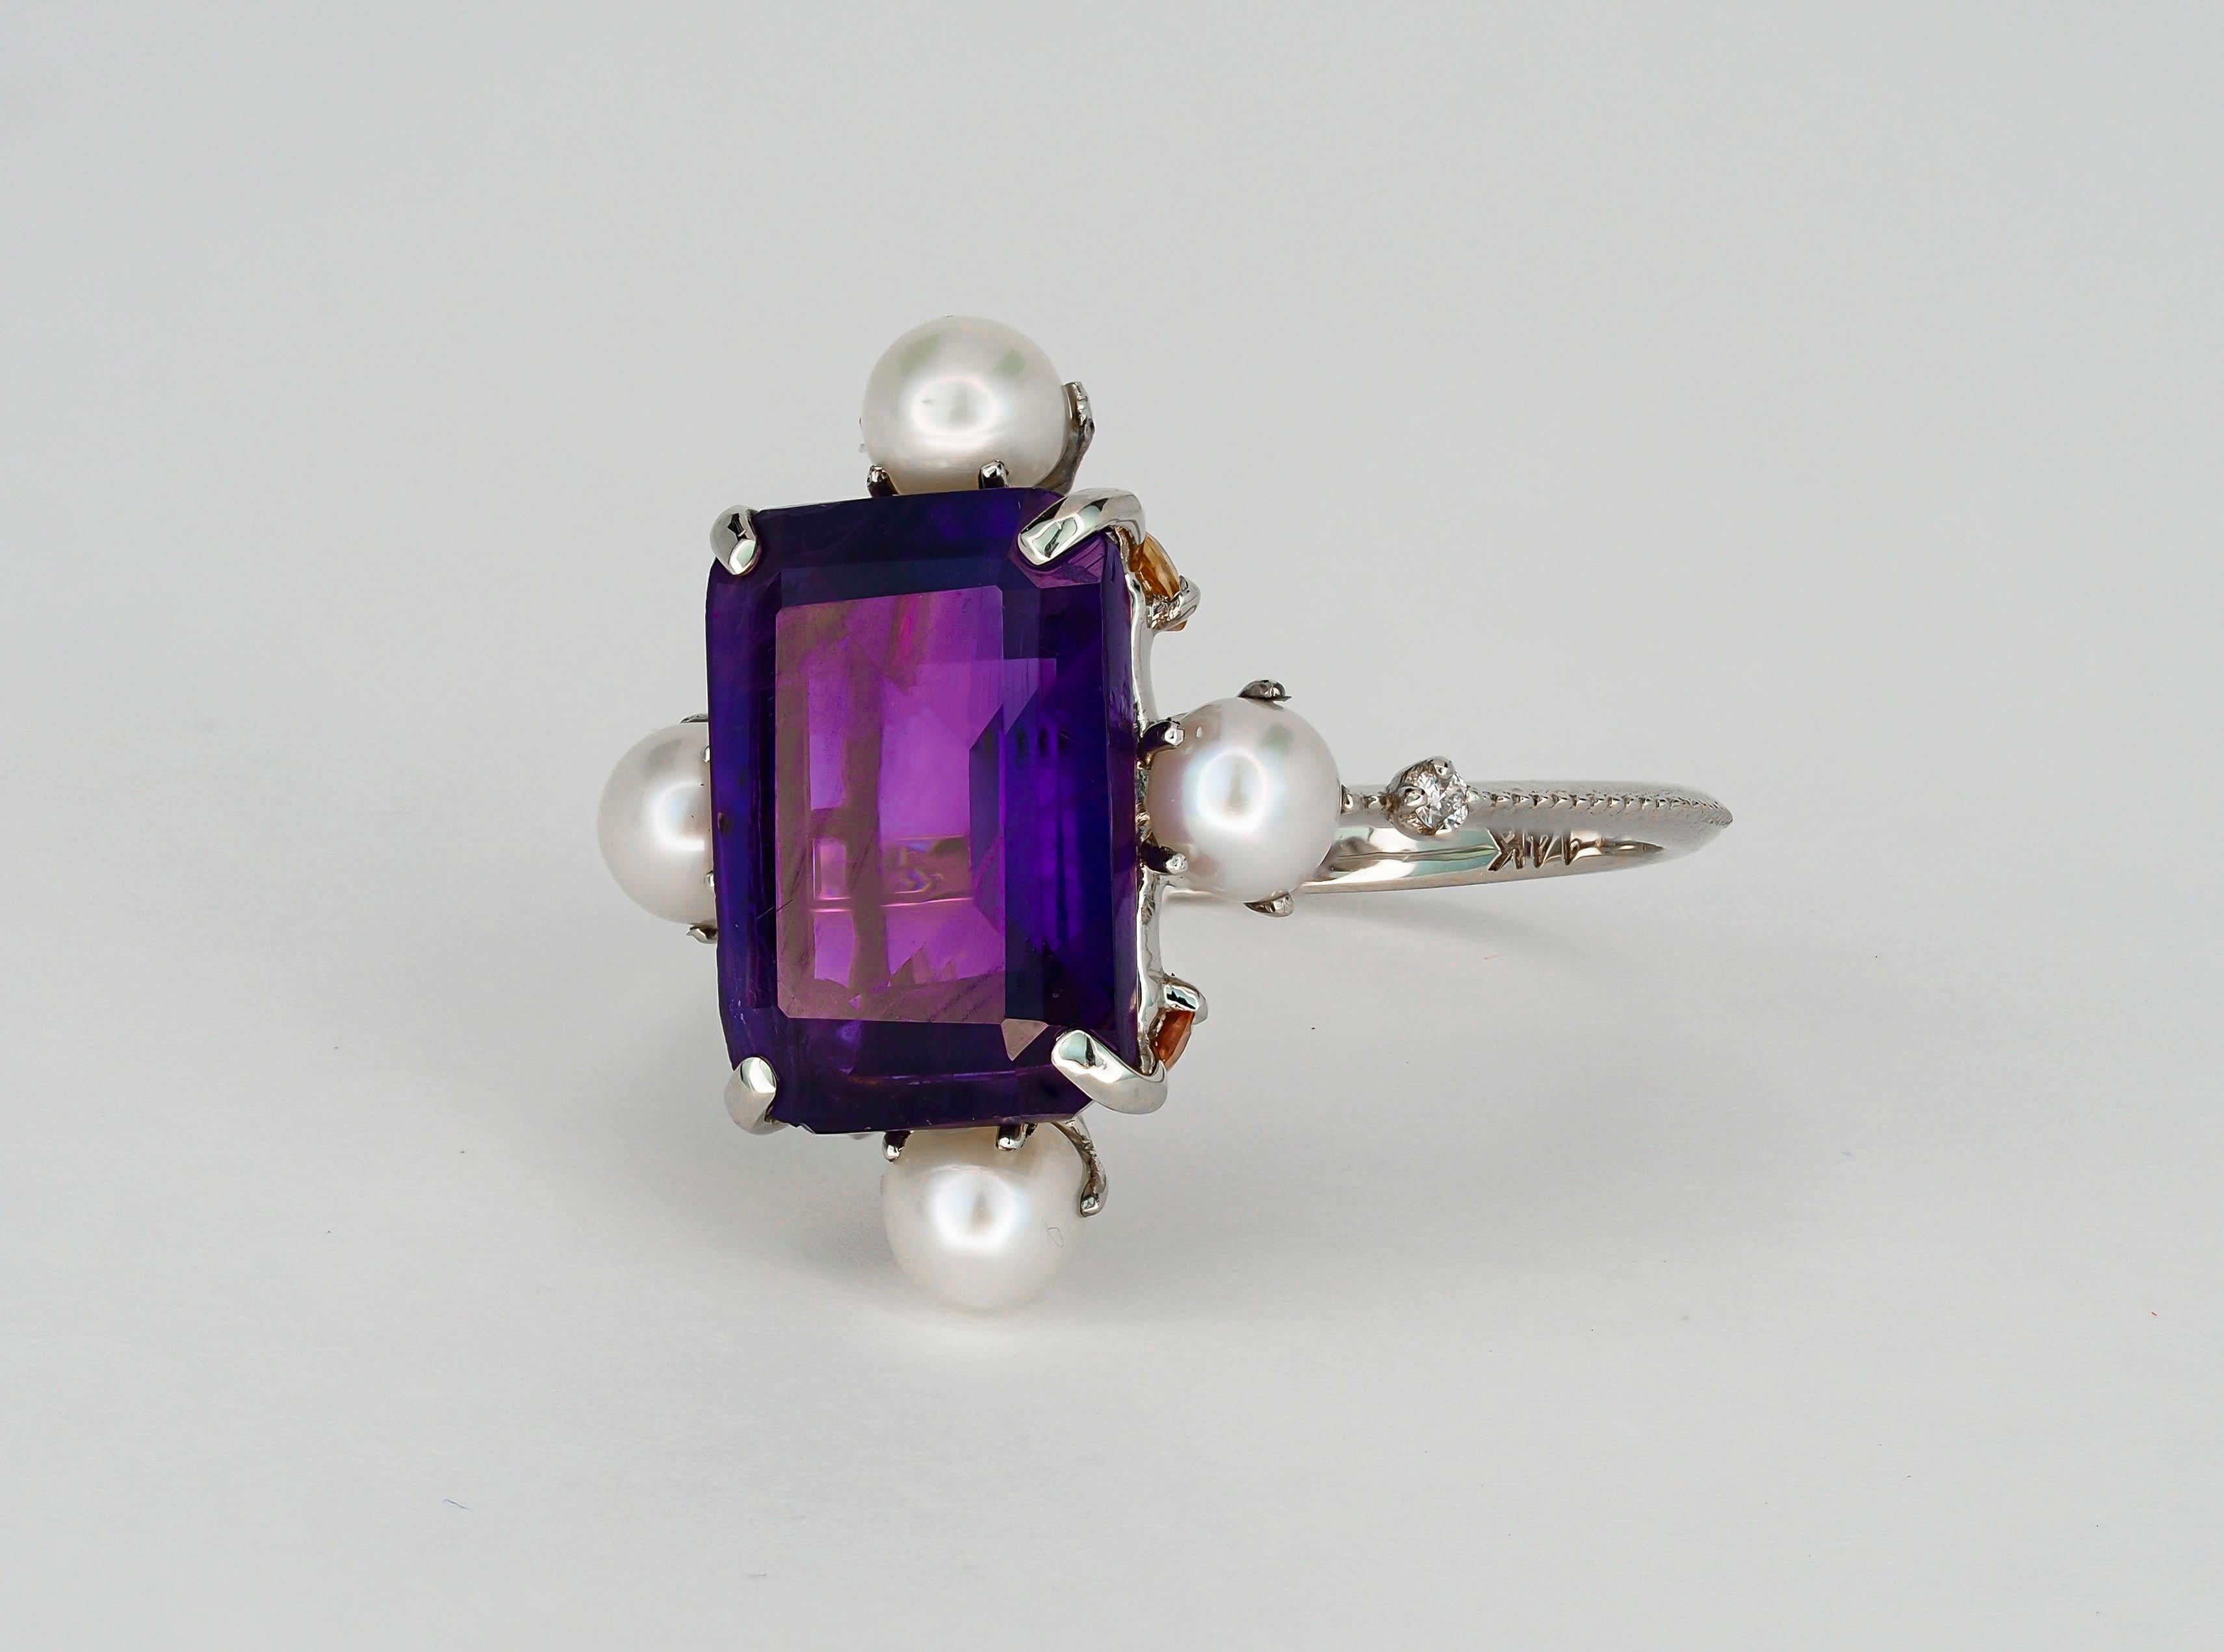 For Sale:  Amethyst ring in 14k gold.  6